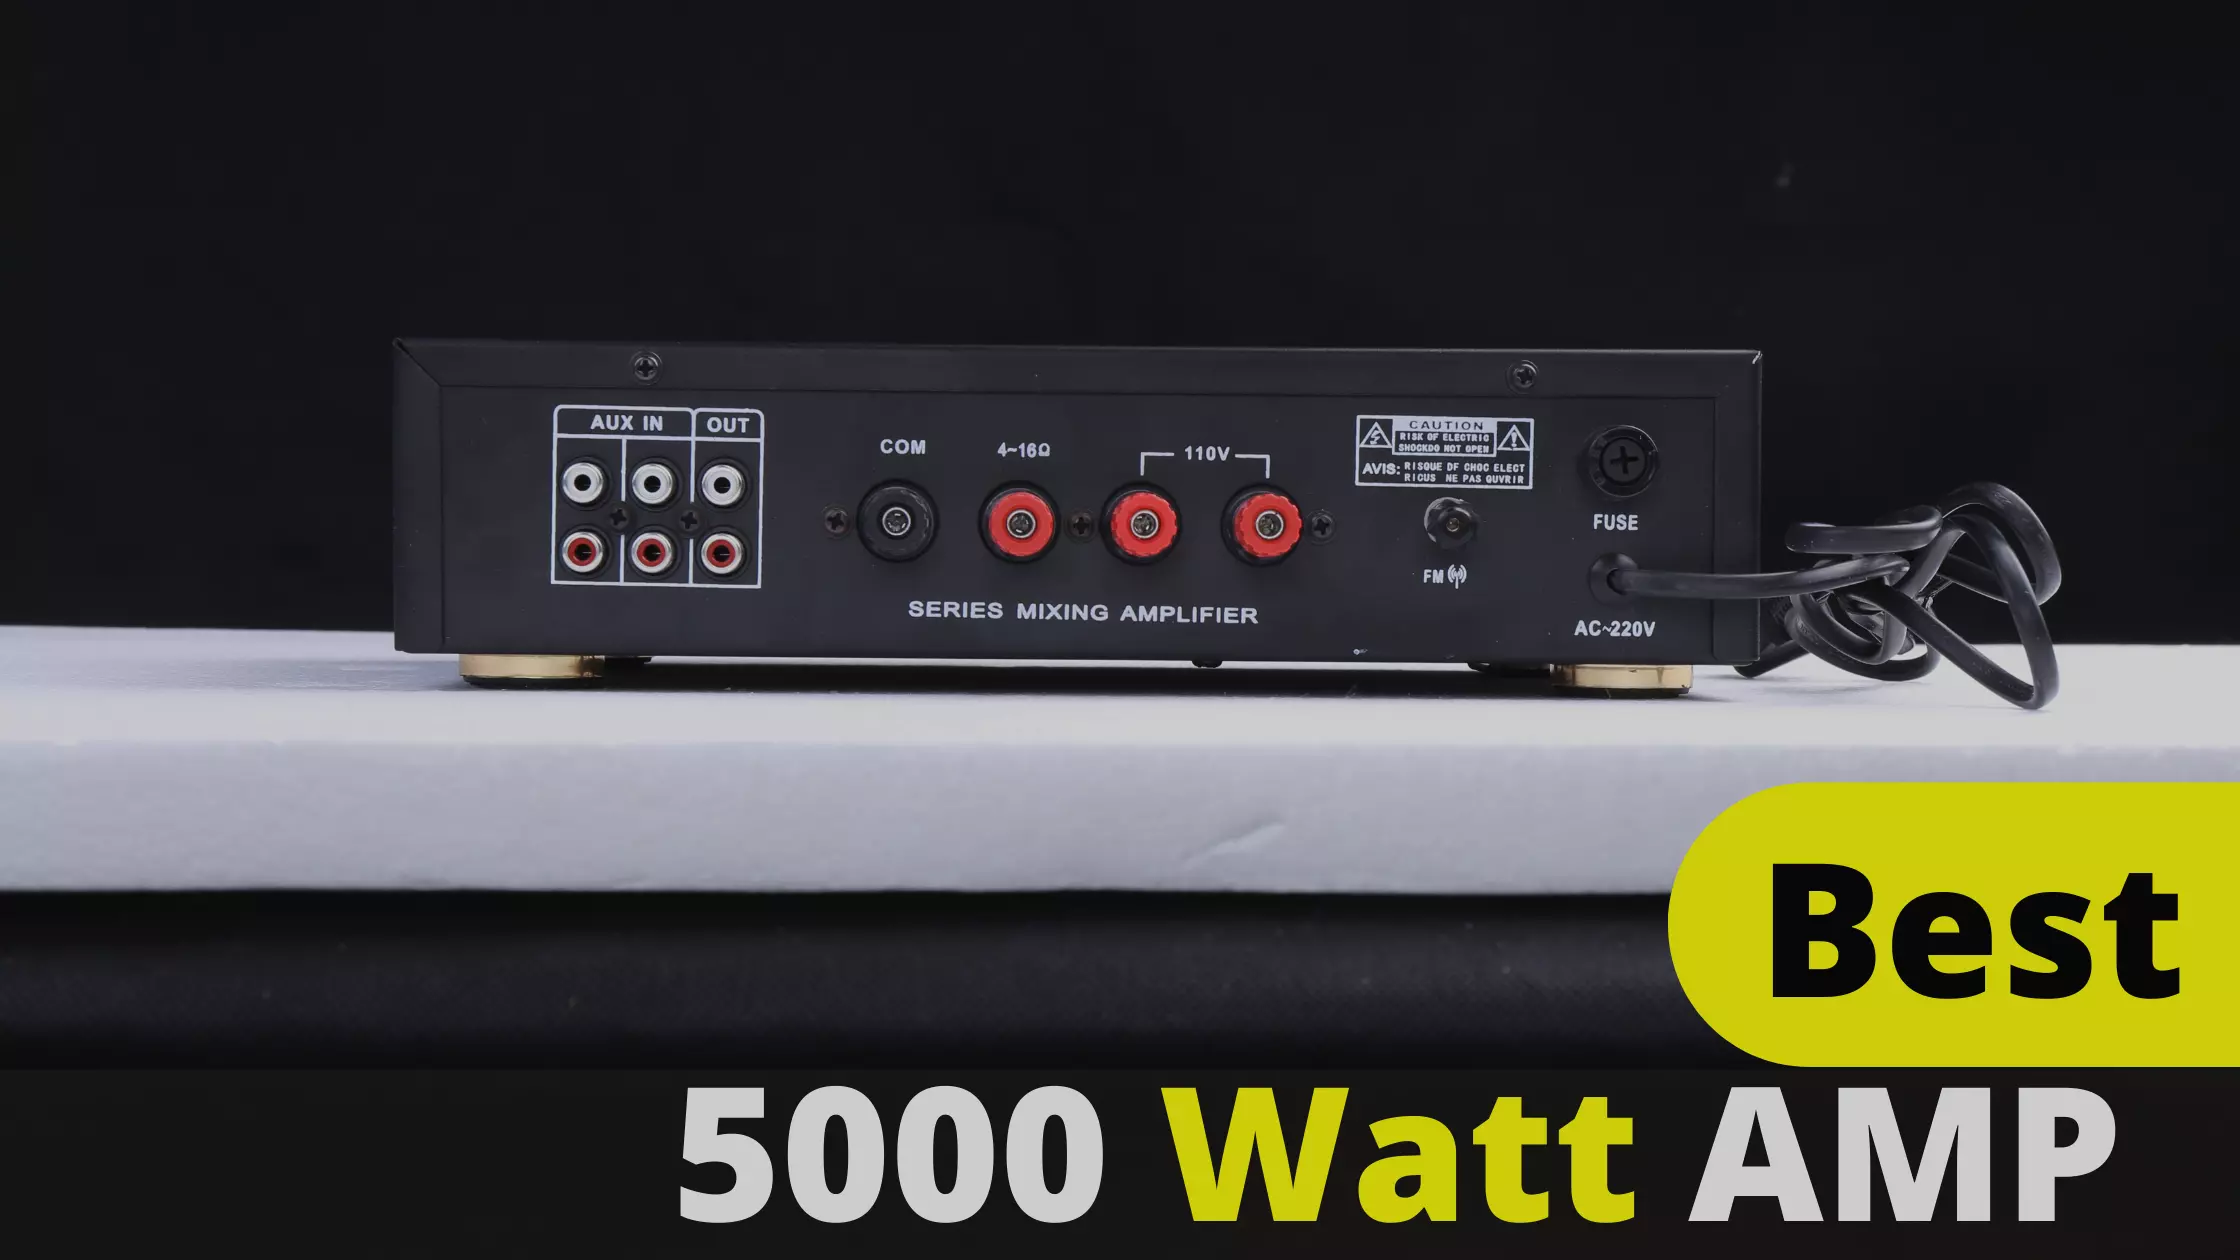 Best 5000 Watt Amp With Complete Details And Tips